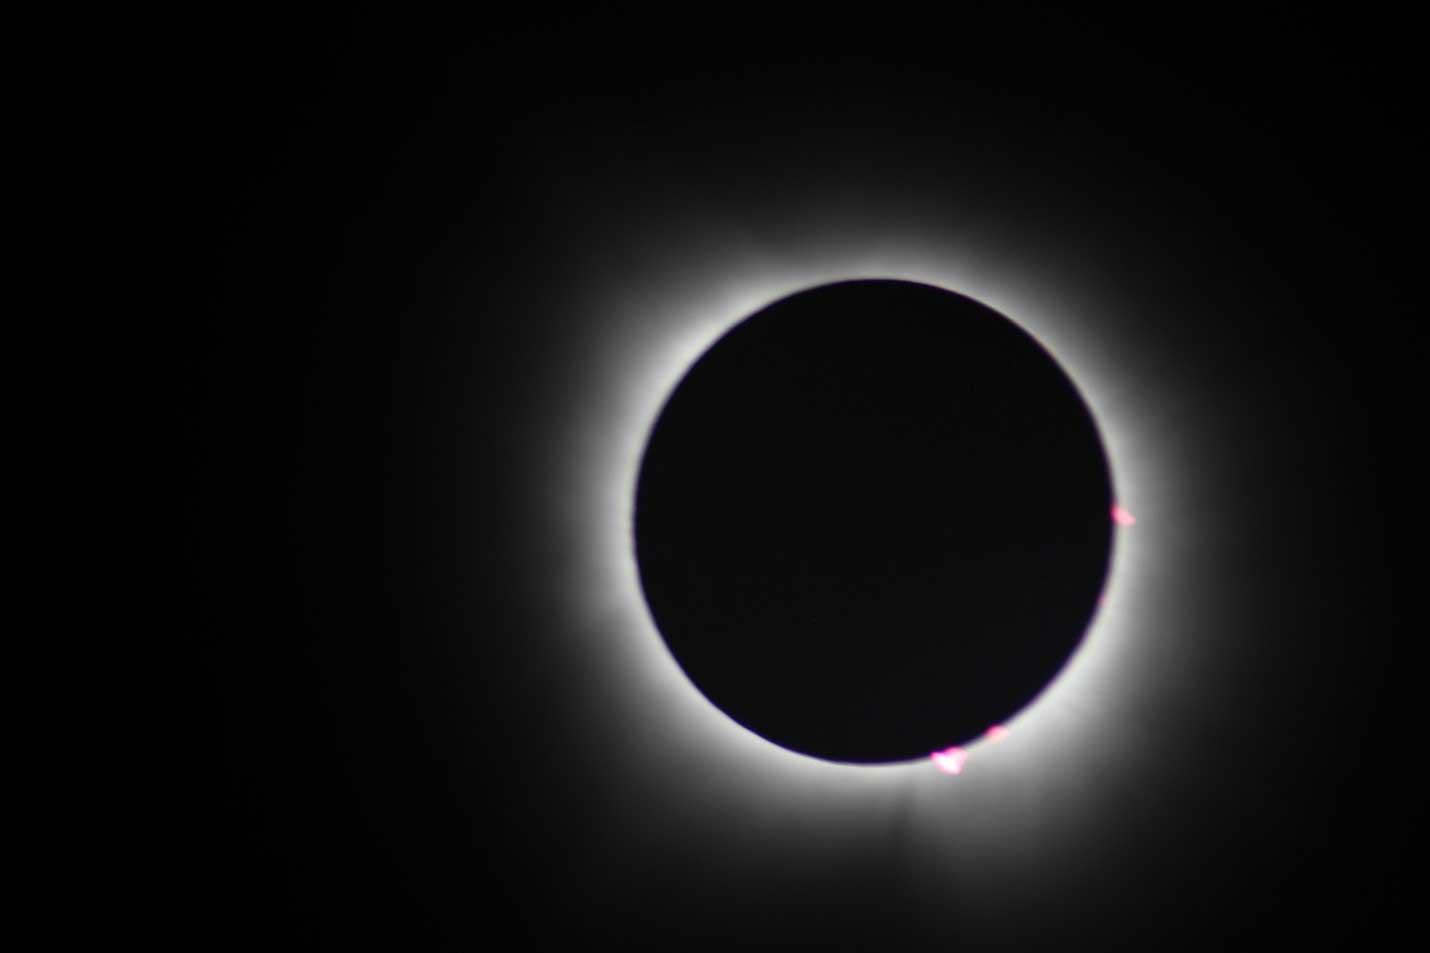 Totality! Yes, I took this picture.